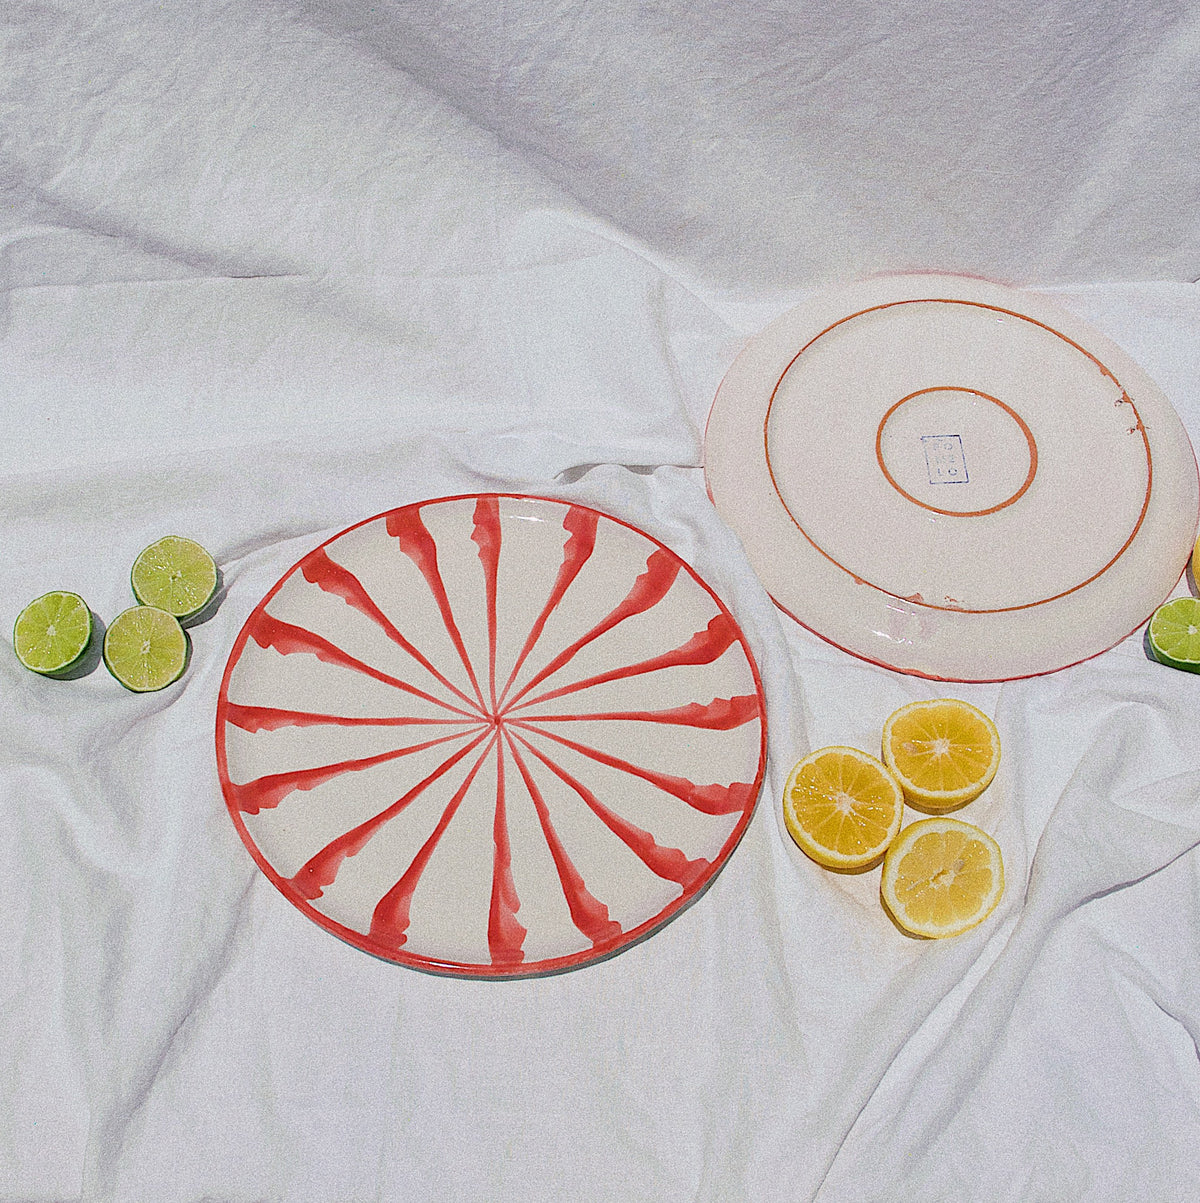 Dinner plate with candy cane stripes - Pomelo casa